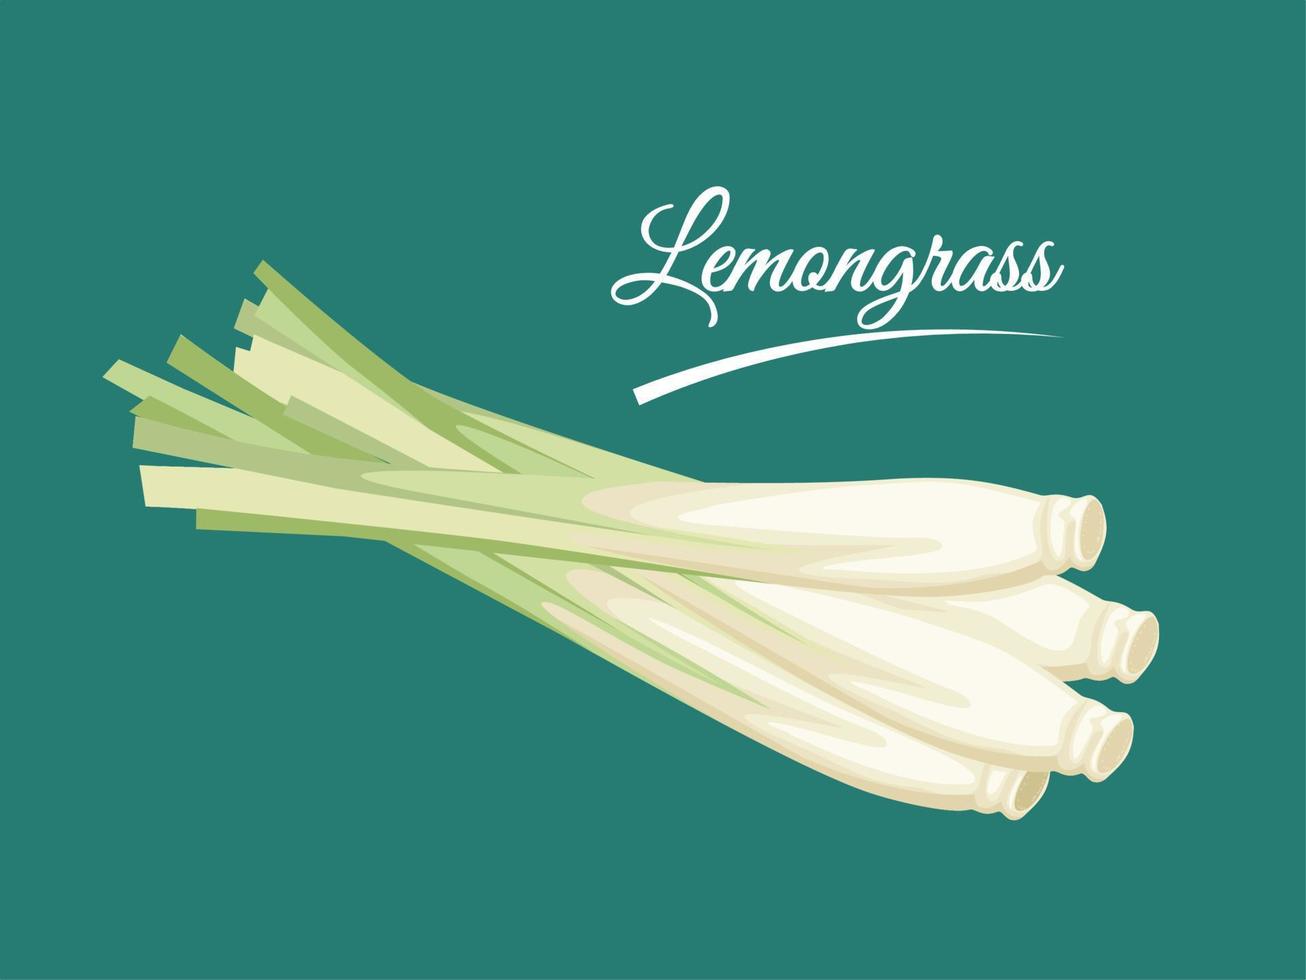 Vector illustration of a bunch of lemongrass or Cymbopogon, isolated on green background.